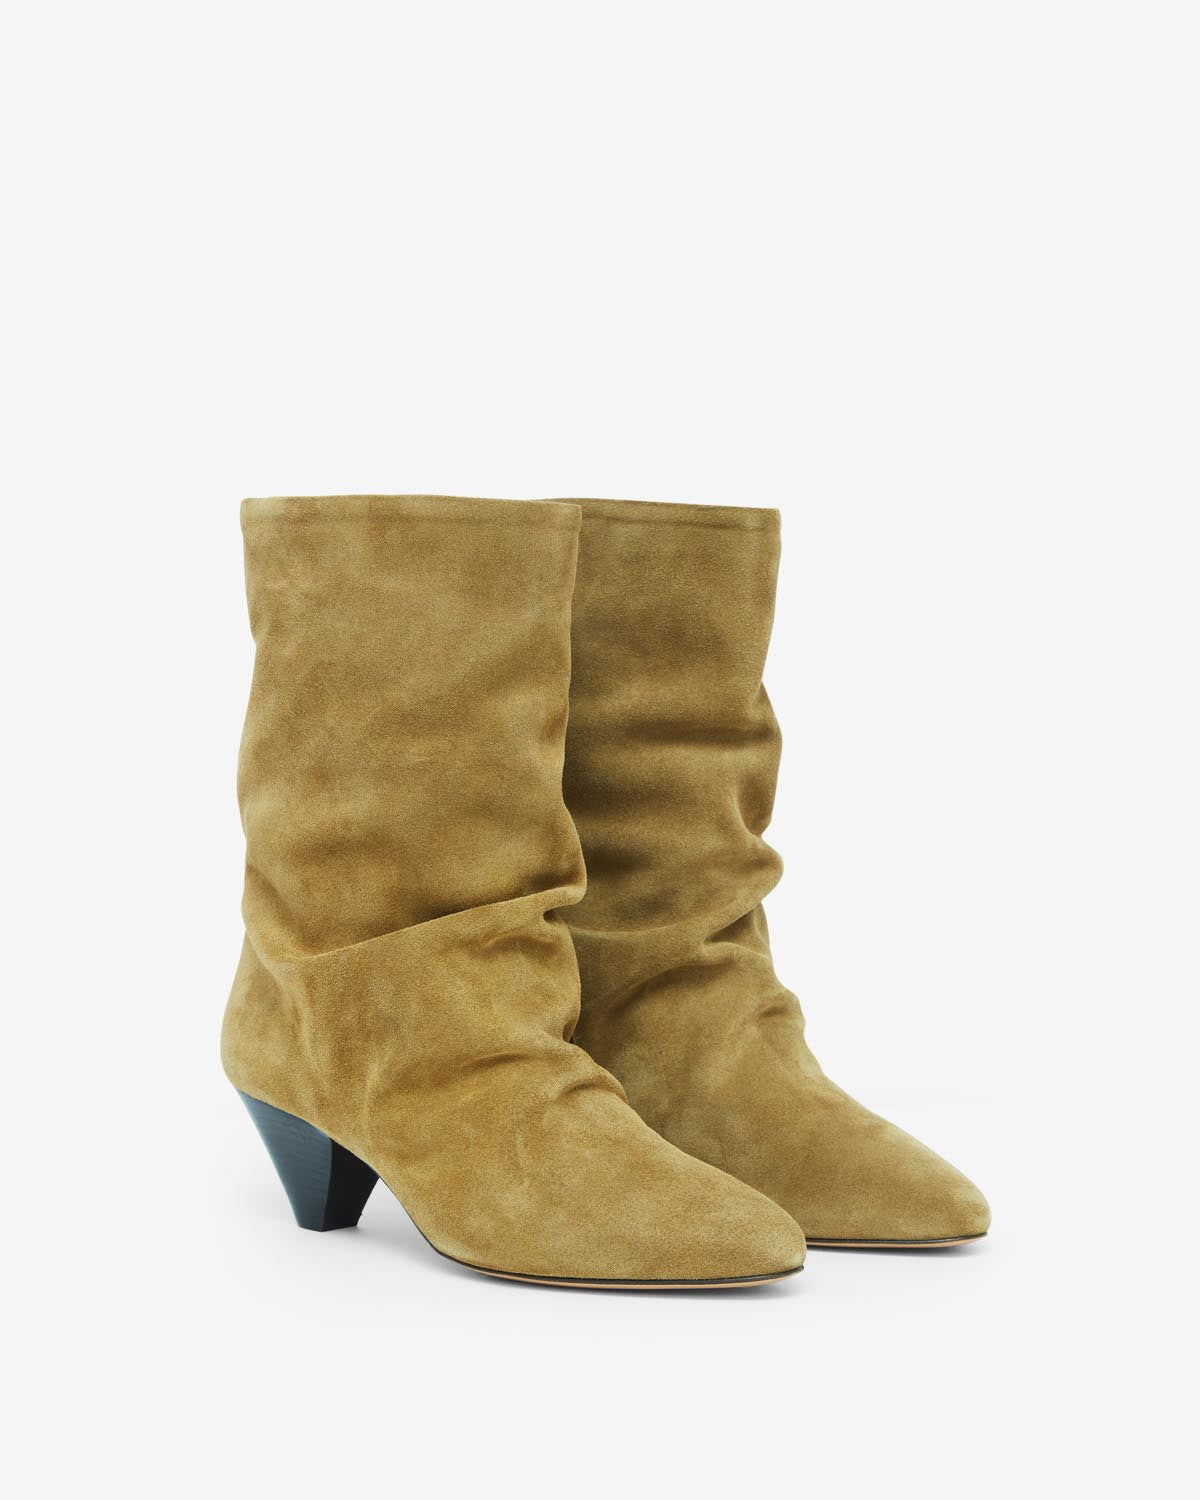 Boots reachi Woman Taupe 2